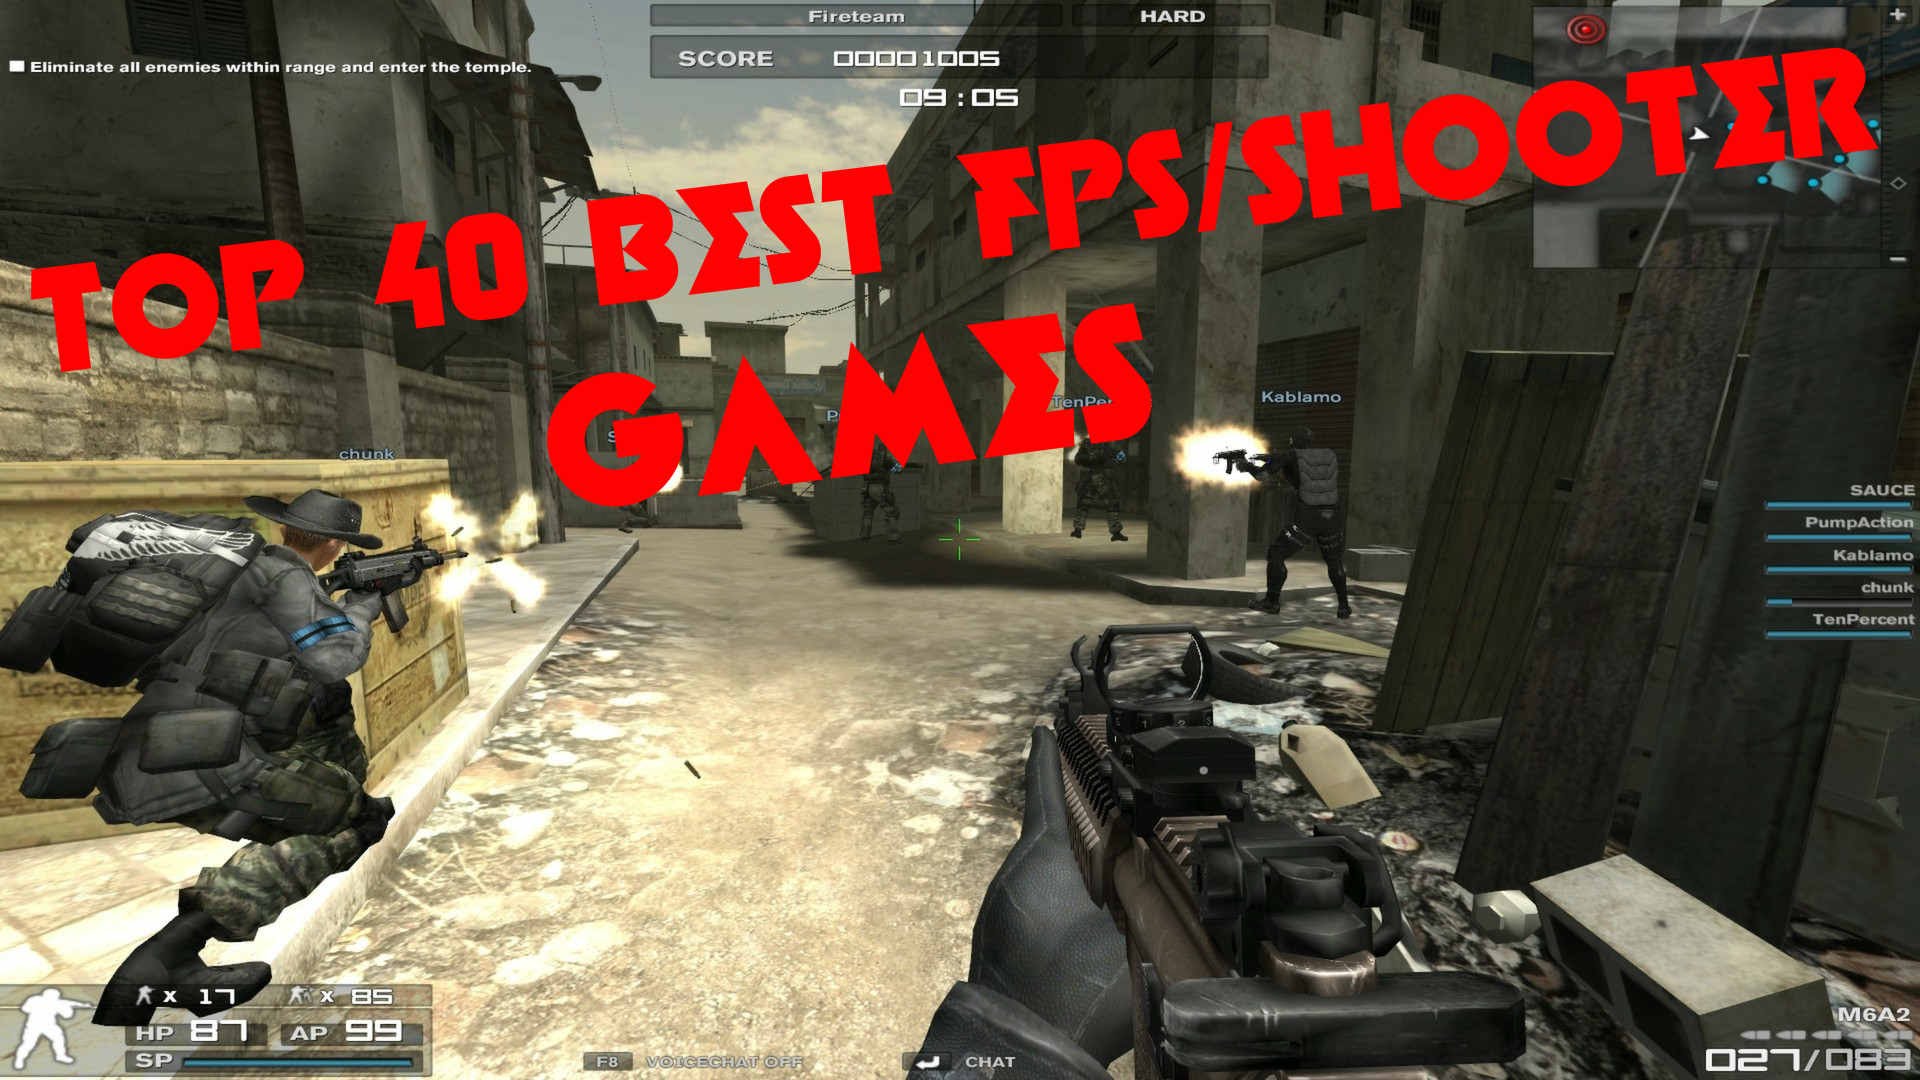 single player not online fps pc free game downloads